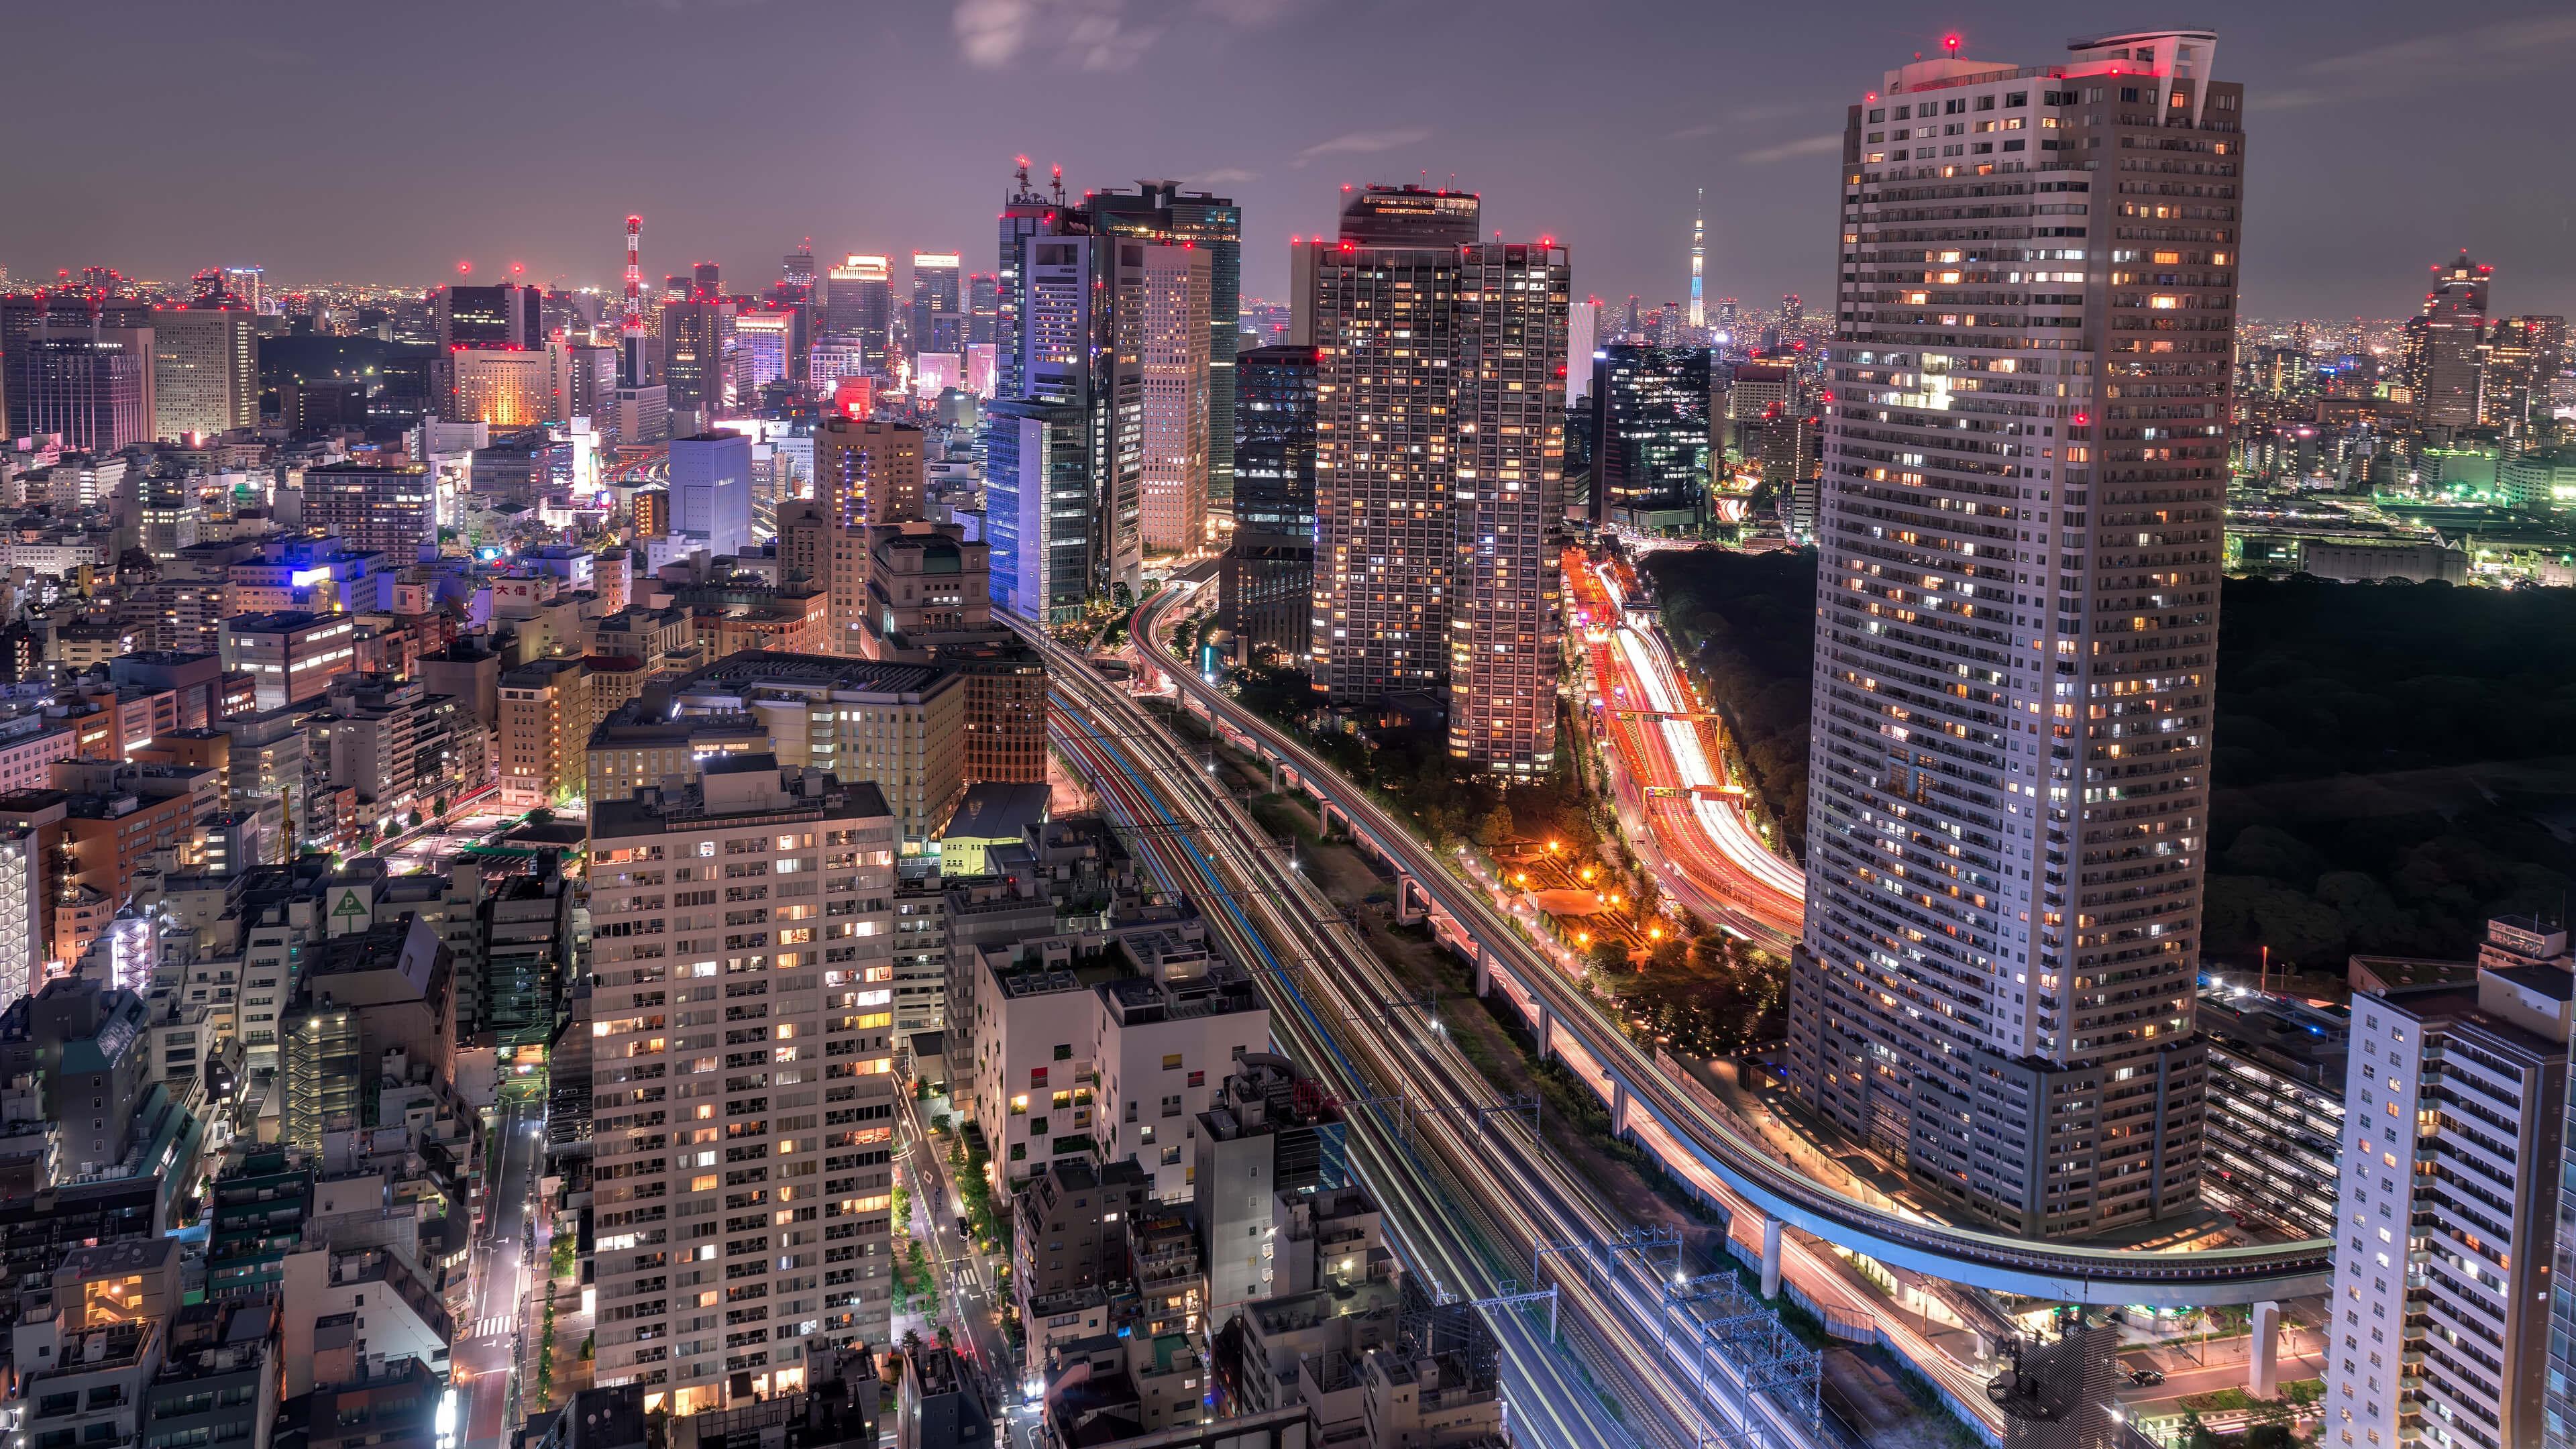 Tokyo Skyline At Night Wallpapers Top Free Tokyo Skyline At Night Backgrounds Wallpaperaccess